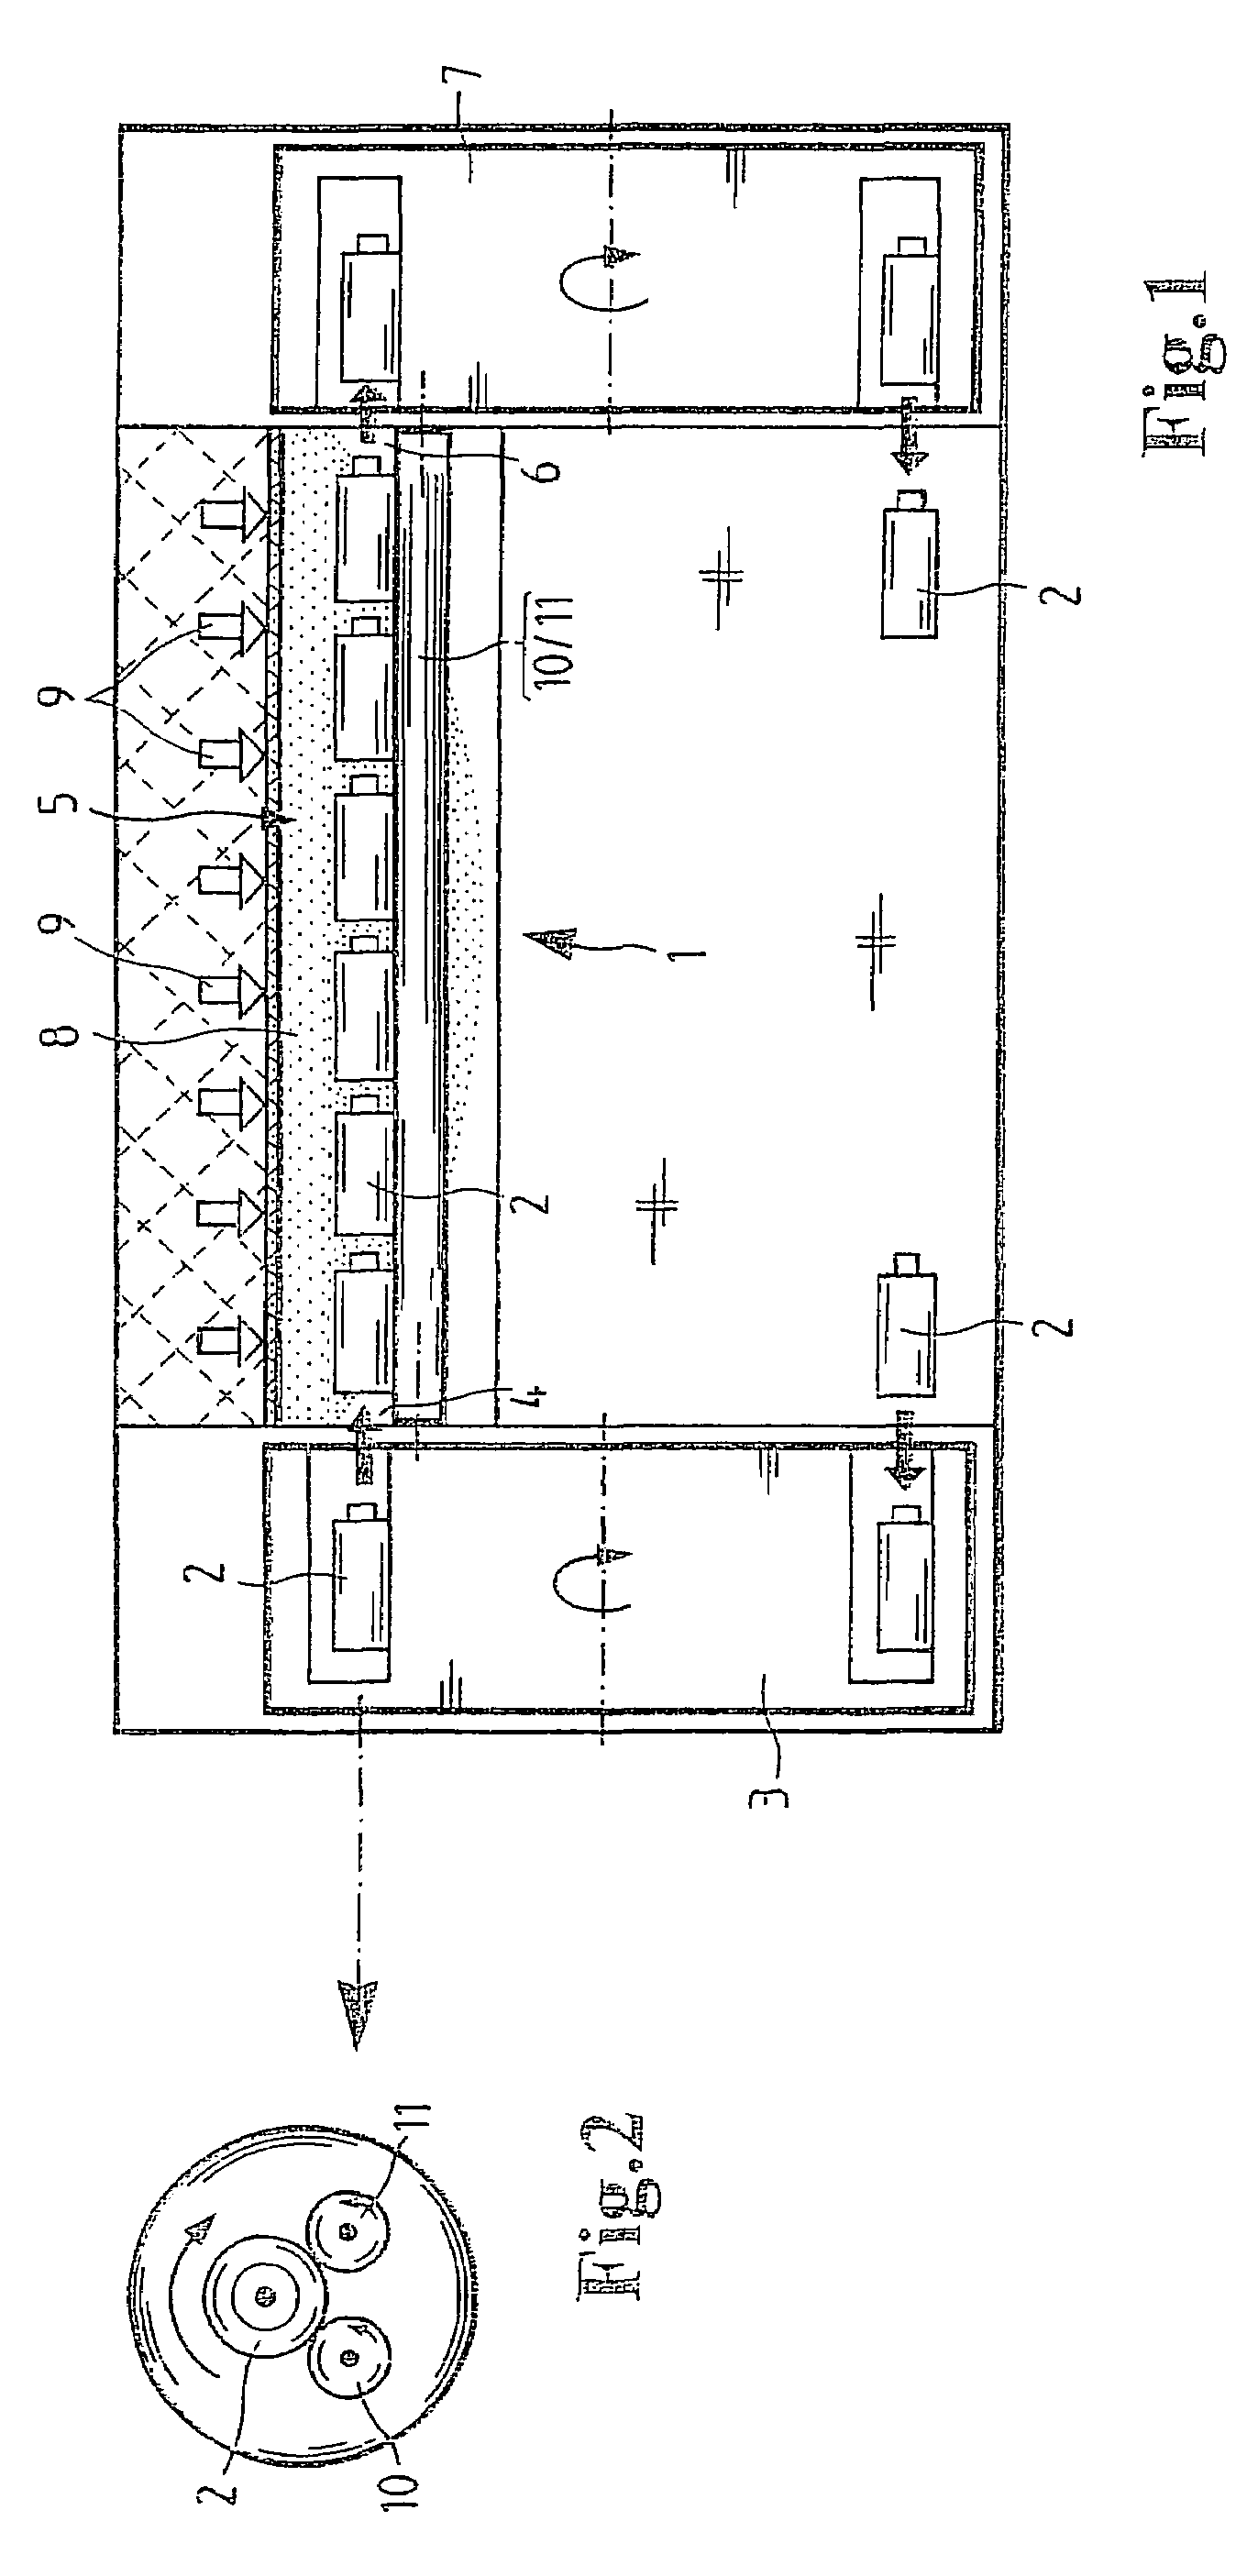 Method and device for sterilizing containers